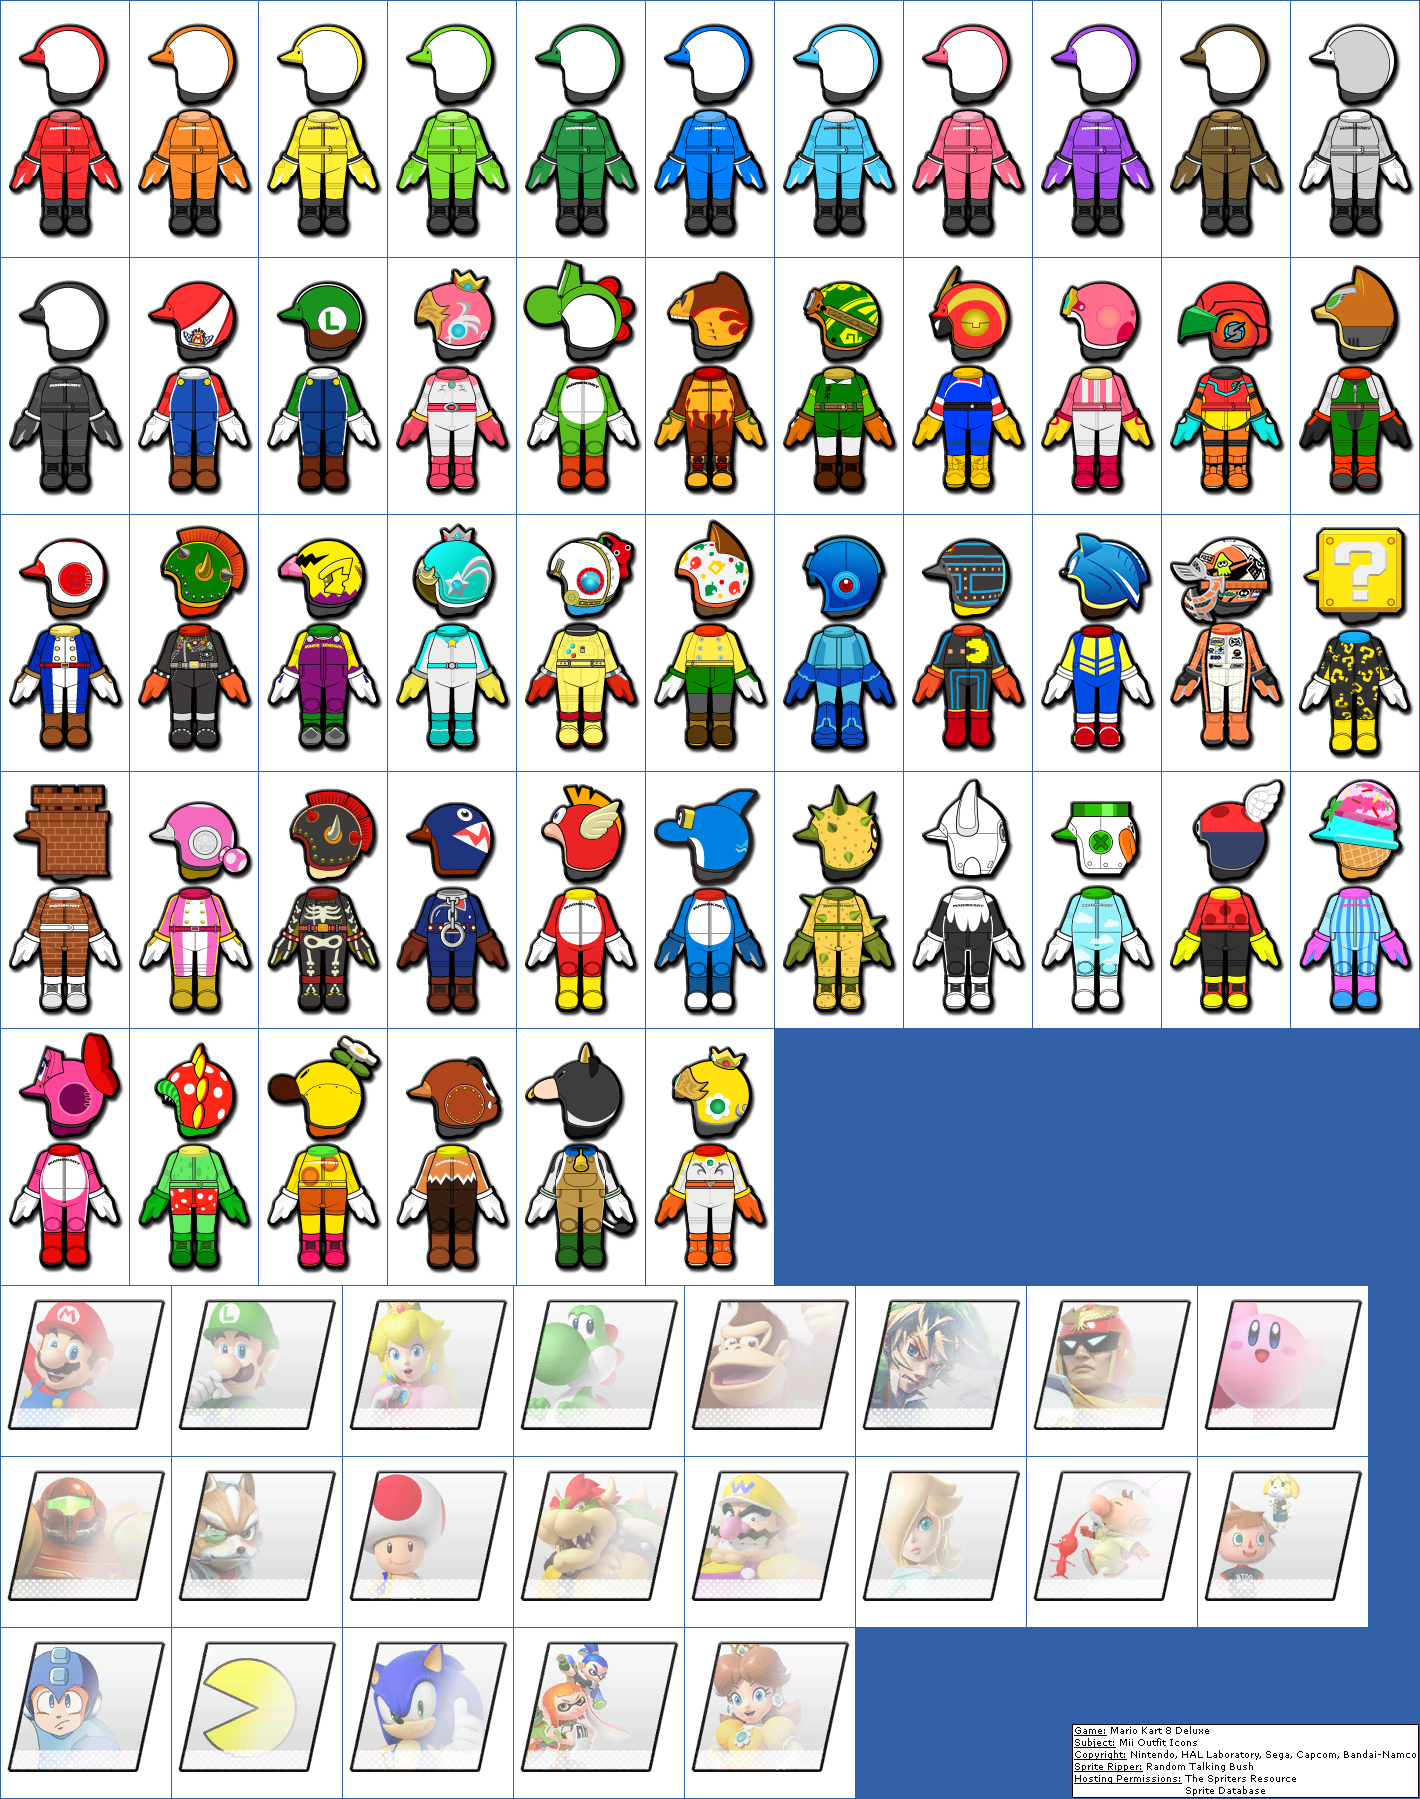 Mario Kart 8 Deluxe - Mii Outfit Icons